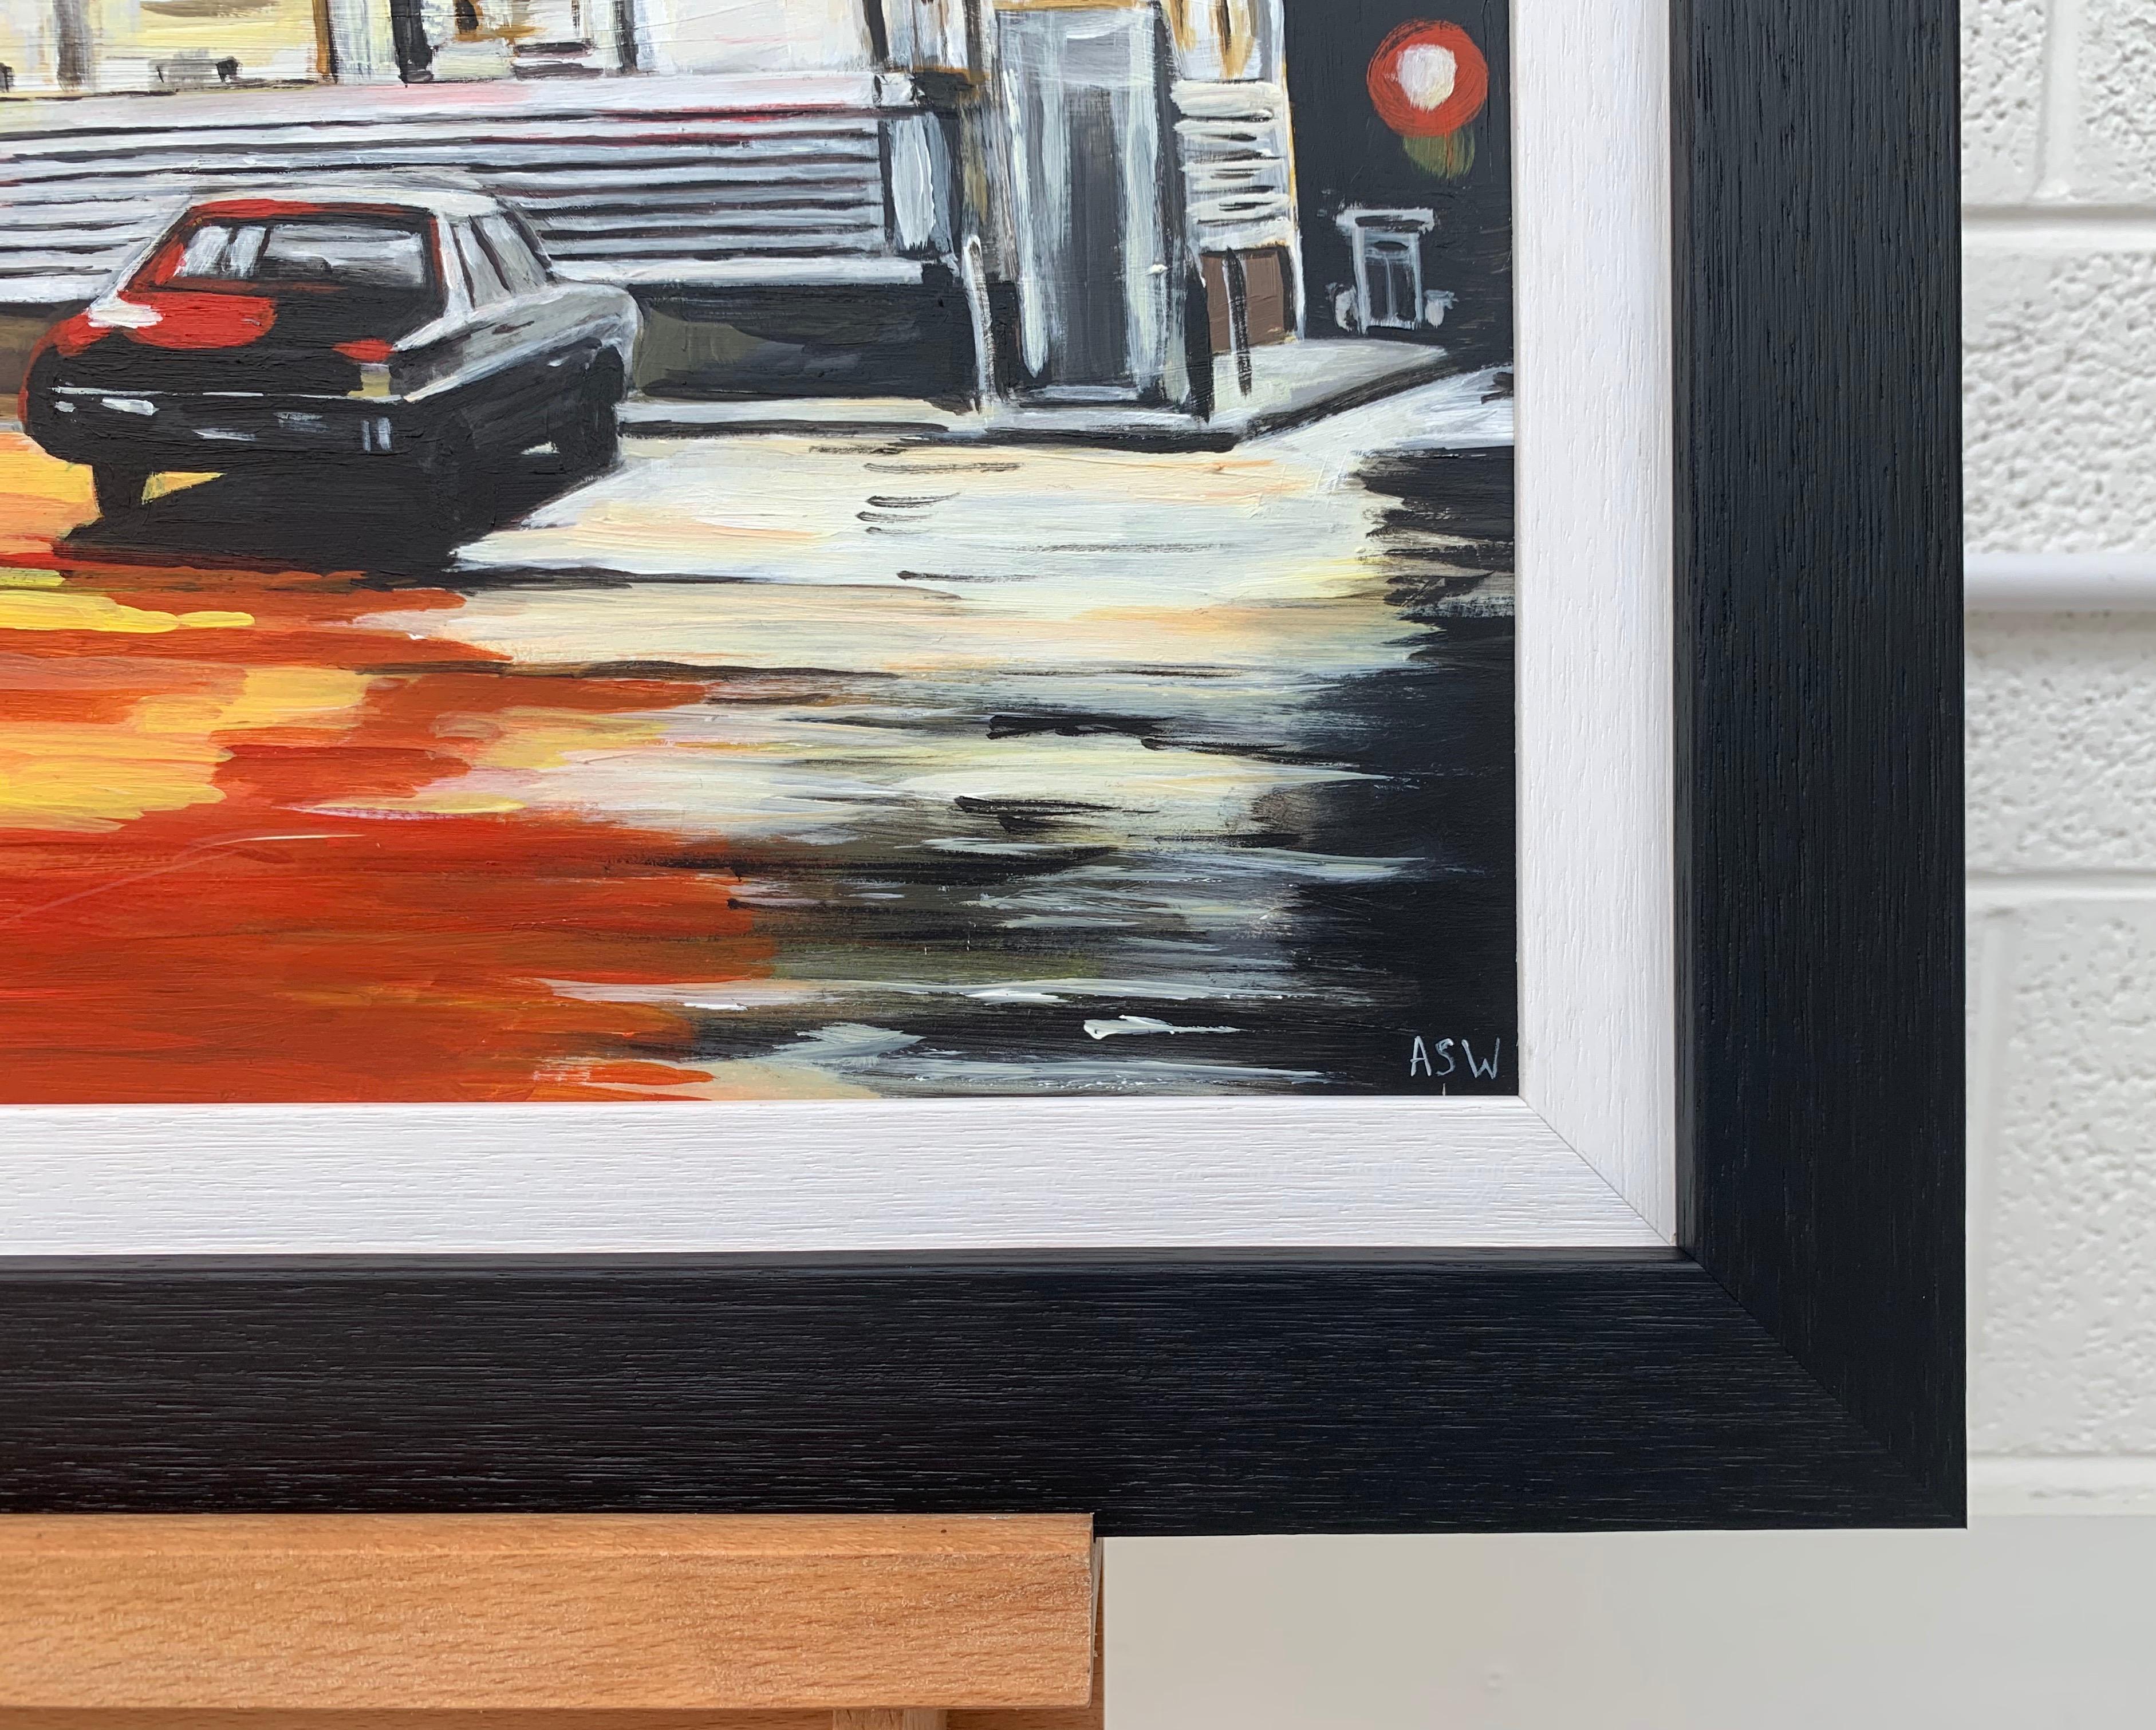 Painting of Olympia Diner American Diner, Connecticut, USA at Night, by Modern British Urban Artist, Angela Wakefield. 

Art measures 24 x 12 inches
Frame measures 29 x 17 inches

Angela Wakefield has twice been on the front cover of ‘Art of